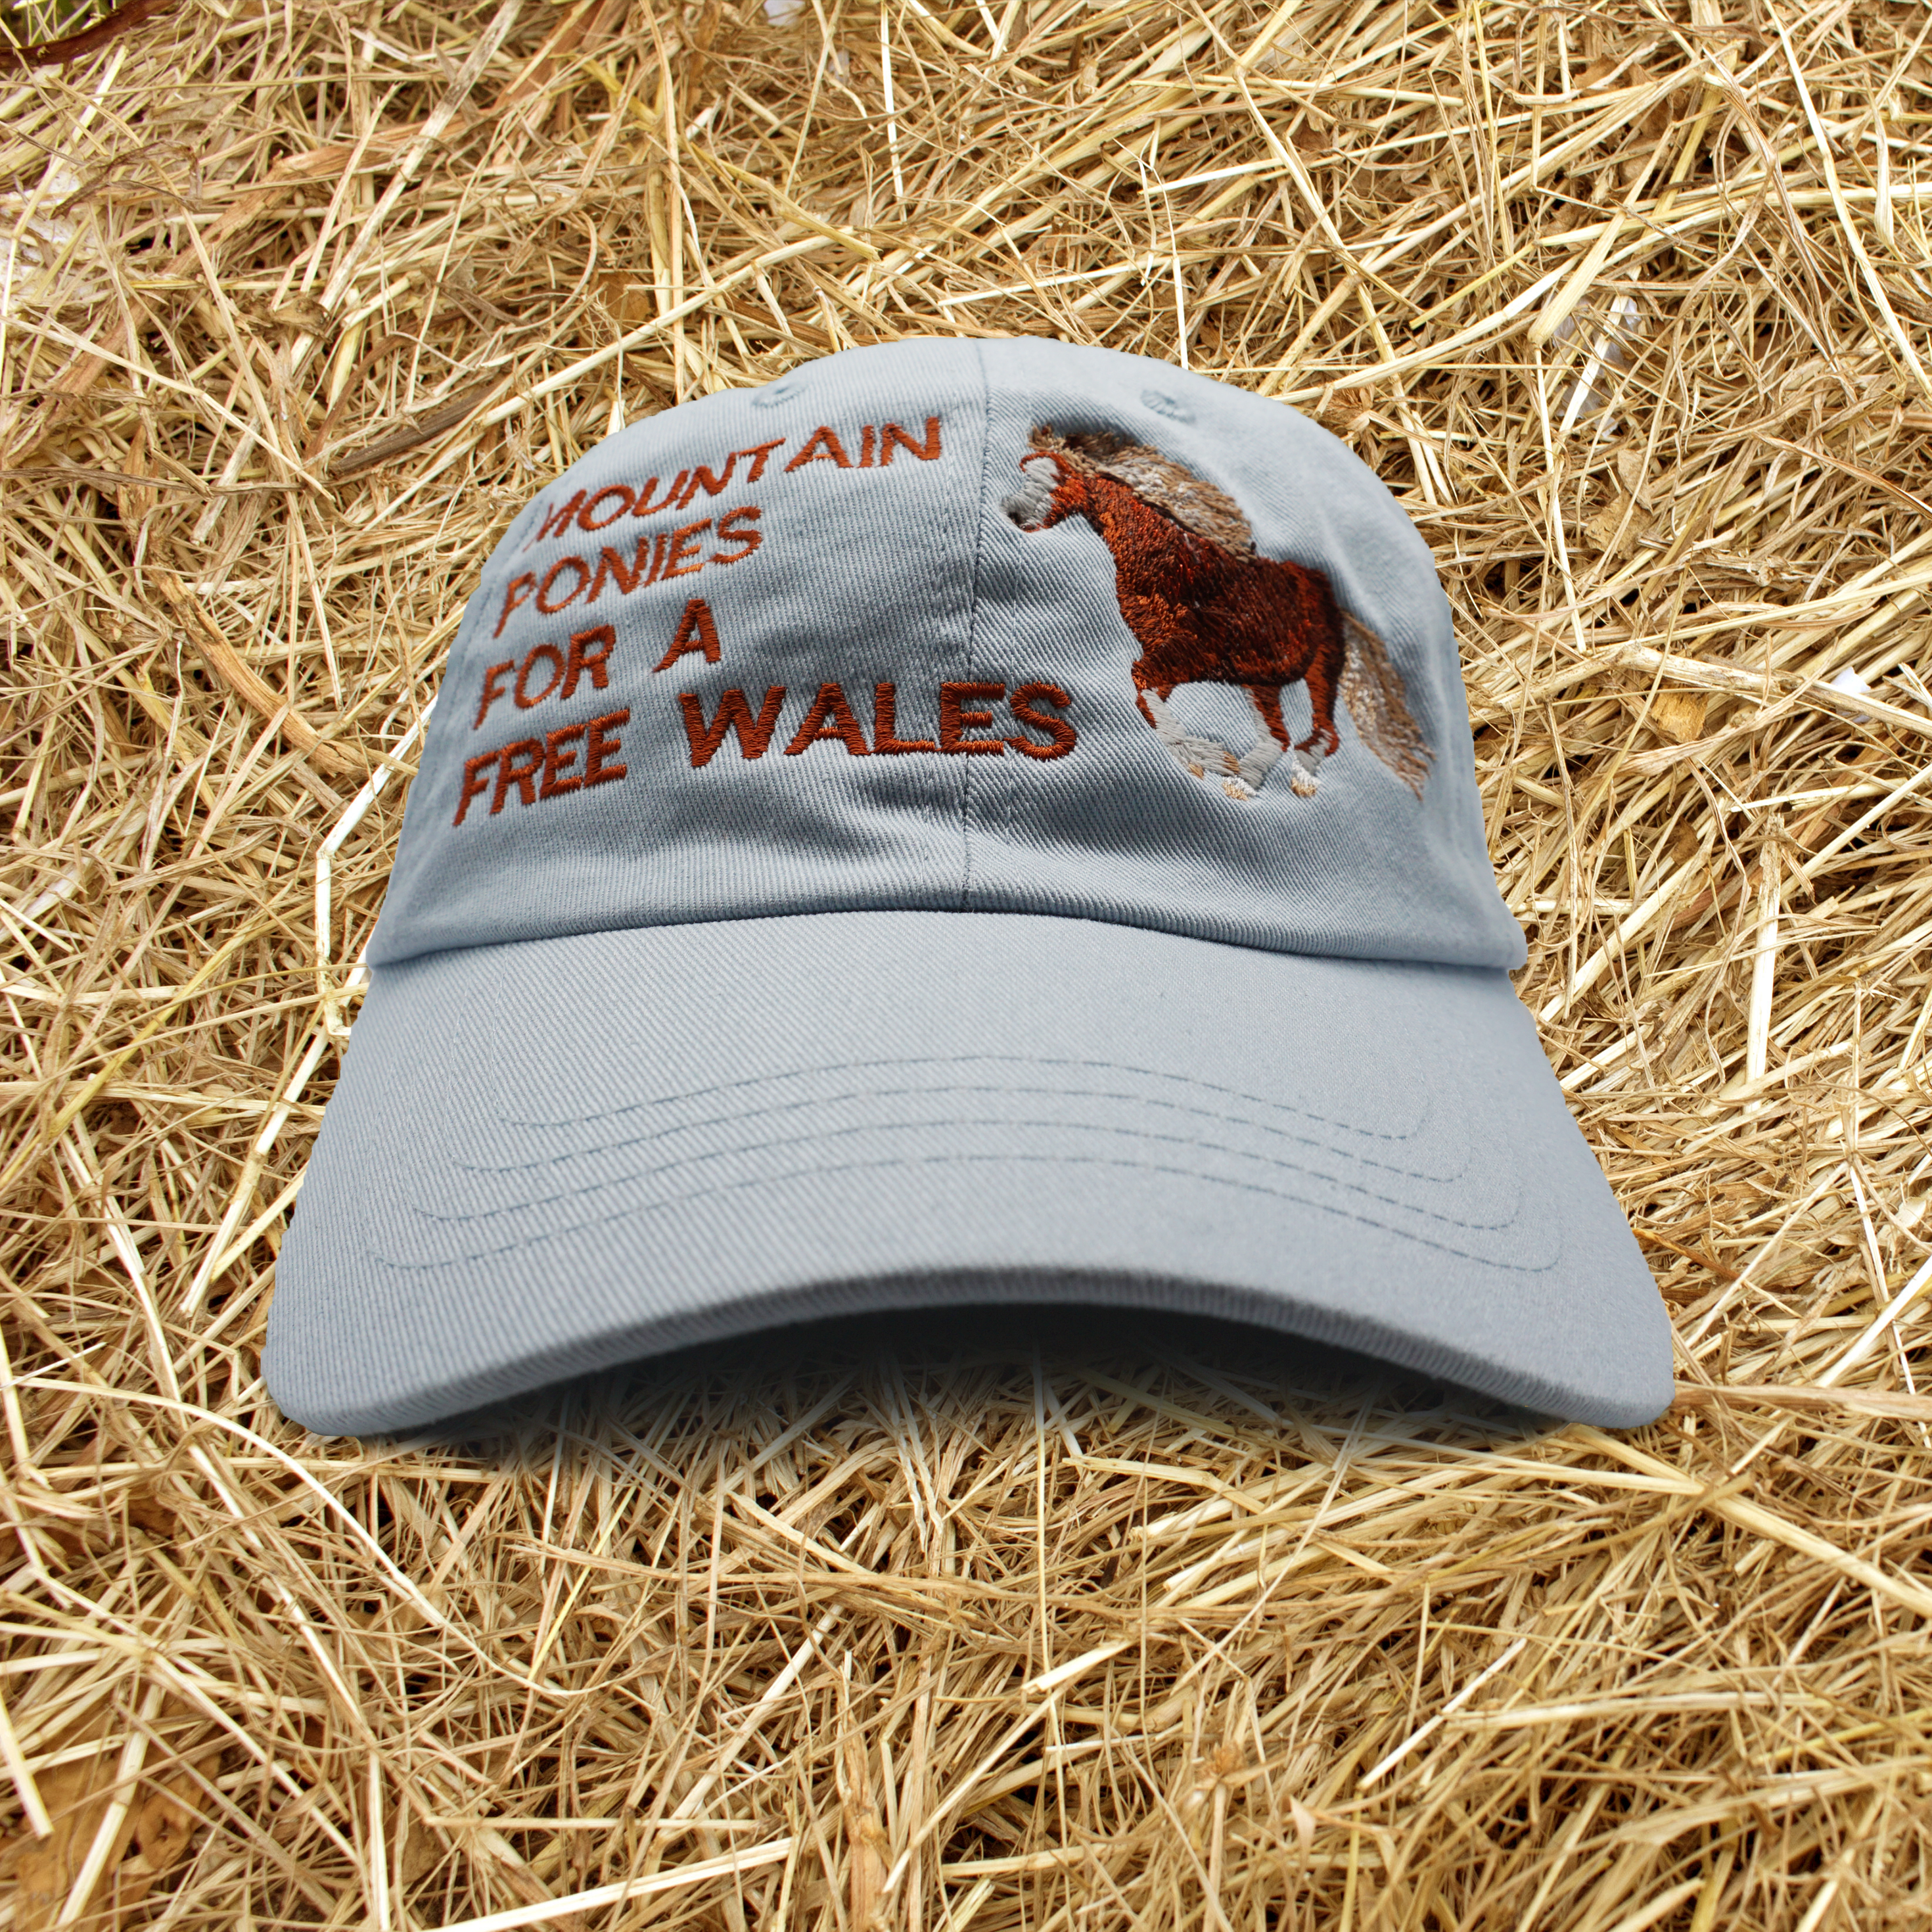 MOUNTAIN PONIES FOR A FREE WALES CAP